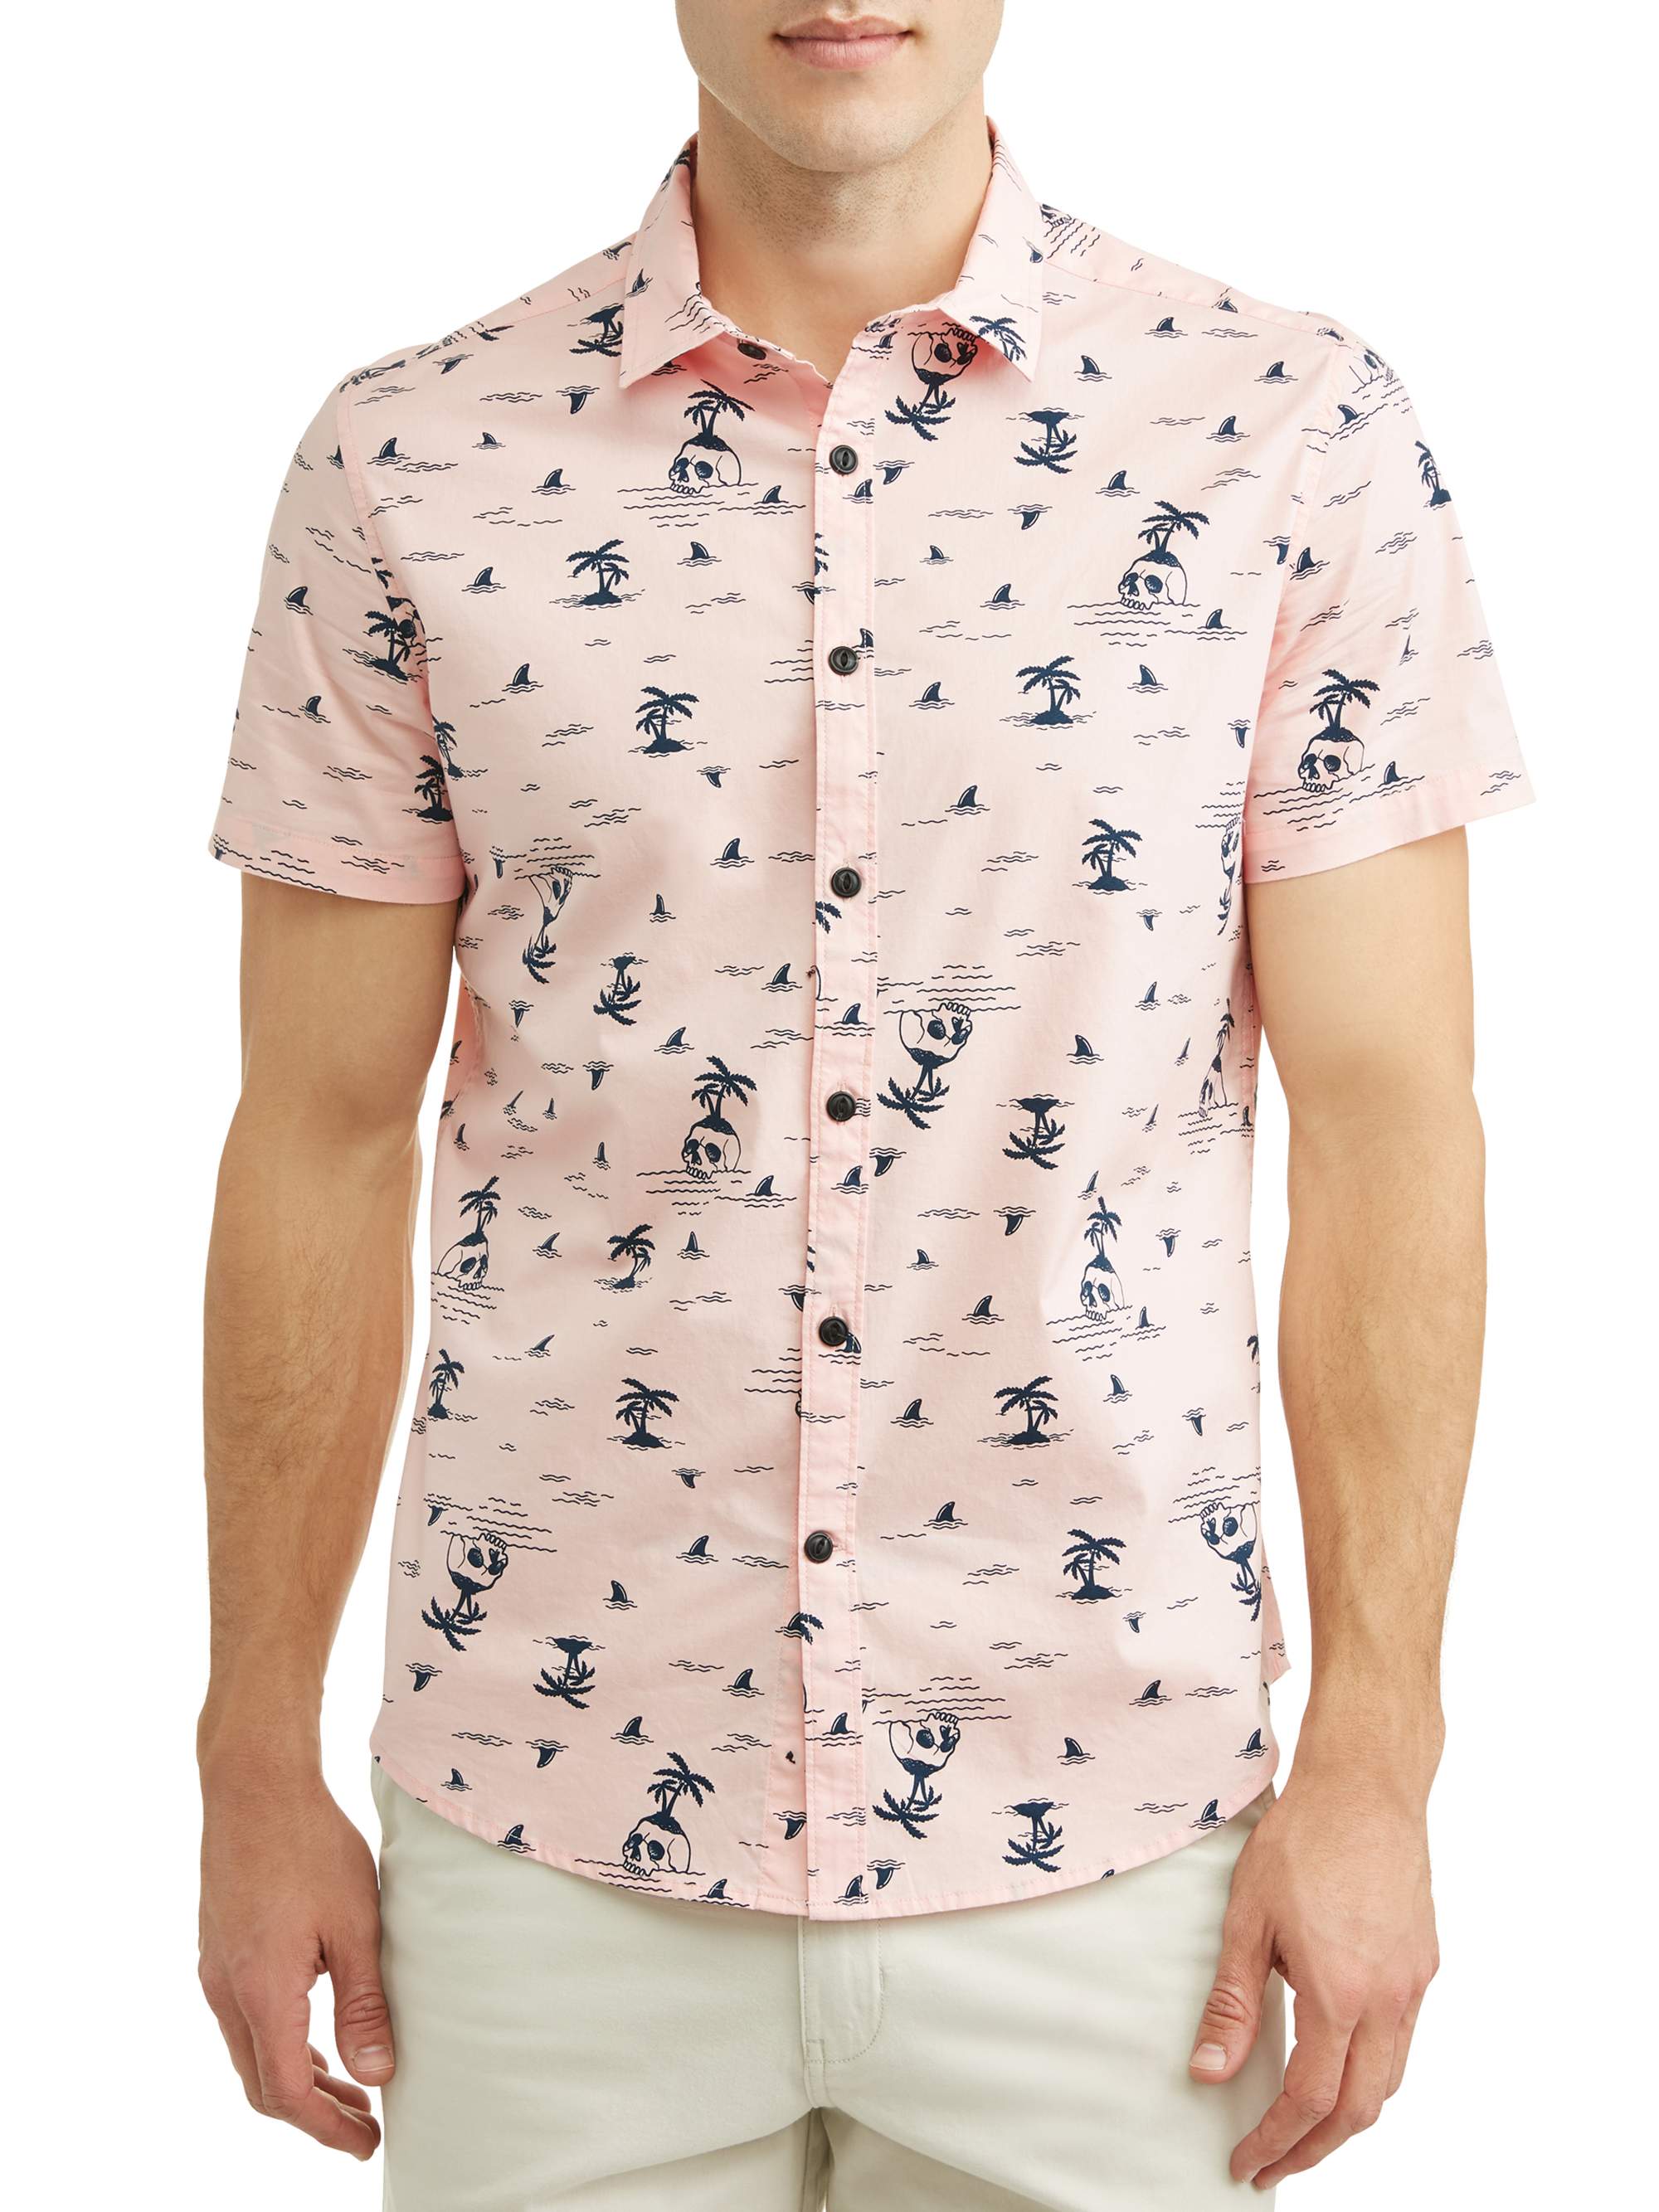 George Young Men's short sleeve Printed Shirt, up to size 3XL - image 1 of 4